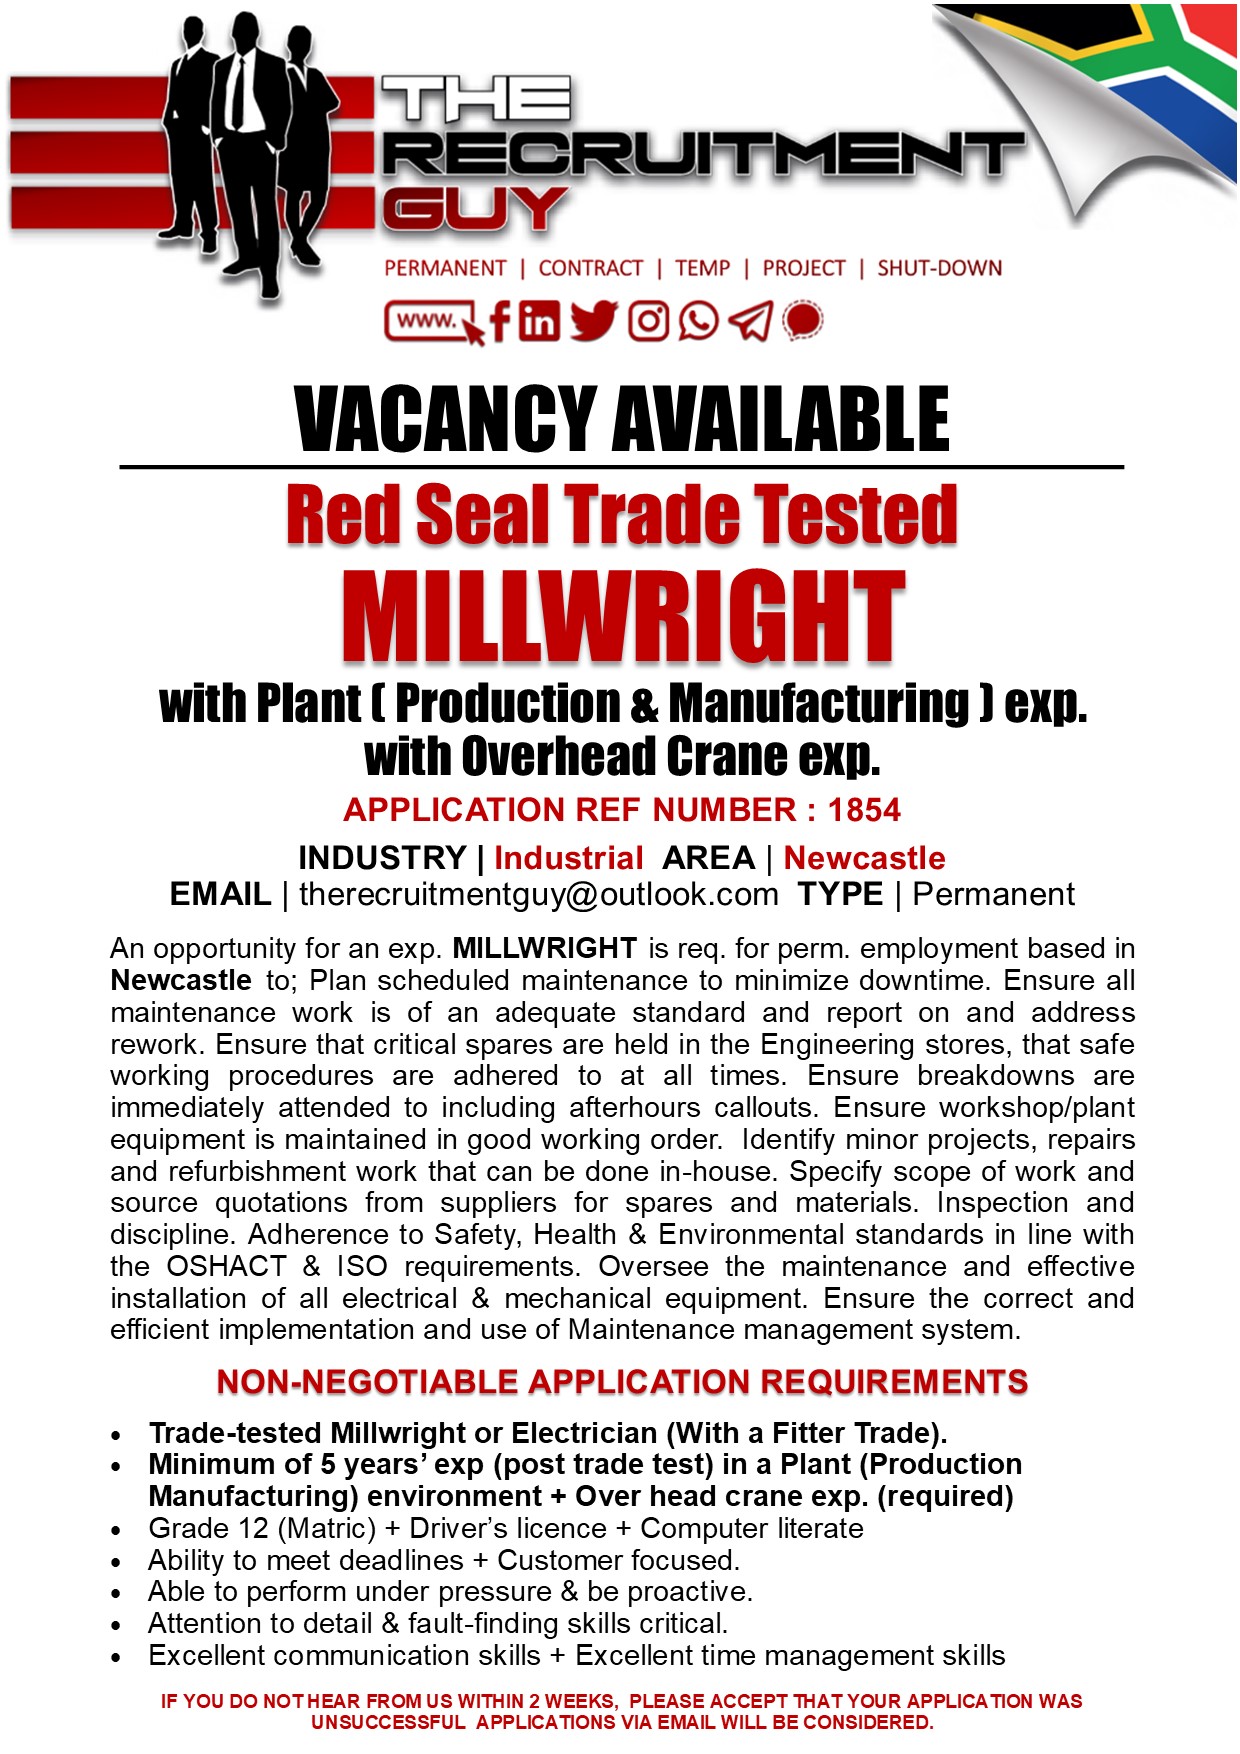 PERMANENT | CONTRACT | TEMP | PROJECT | SHUT-DOWN

CT efRYOOL®

VACANCY AVAILABLE
Red Seal Trade Tested

MILLWRIGHT

with Plant [ Production & Manufacturing ) exp.
with Overhead Crane exp.

APPLICATION REF NUMBER : 1854

INDUSTRY | Industrial AREA | Newcastle
EMAIL | therecruitmentguy@outlook.com TYPE | Permanent

An opportunity for an exp. MILLWRIGHT is req. for perm. employment based in
Newcastle to; Plan scheduled maintenance to minimize downtime. Ensure all
maintenance work is of an adequate standard and report on and address
rework. Ensure that critical spares are held in the Engineering stores, that safe
working procedures are adhered to at all times. Ensure breakdowns are
immediately attended to including afterhours callouts. Ensure workshop/plant
equipment is maintained in good working order. Identify minor projects, repairs
and refurbishment work that can be done in-house. Specify scope of work and
source quotations from suppliers for spares and materials. Inspection and
discipline. Adherence to Safety, Health & Environmental standards in line with
the OSHACT & ISO requirements. Oversee the maintenance and effective
installation of all electrical & mechanical equipment. Ensure the correct and
efficient implementation and use of Maintenance management system

NON-NEGOTIABLE APPLICATION REQUIREMENTS

+ Trade-tested Millwright or Electrician (With a Fitter Trade).
Minimum of § years’ exp (post trade test) in a Plant (Production
Manufacturing) environment + Over head crane exp. (required)
Grade 12 (Matric) + Driver's licence + Computer literate

Ability to meet deadlines + Customer focused

Able to perform under pressure & be proactive

Attention to detail & fault-finding skills critical

Excellent communication skills + Excellent time management skills

IF YOU DO NOTHEAR FROM US WITHIN 2 WEEKS, PLEASE ACCEPT THAT YOUR APPLICATION WAS
UNSUCCESSFUL APPLICATIONS VIA EMAIL WILL BE CONSIDERED.